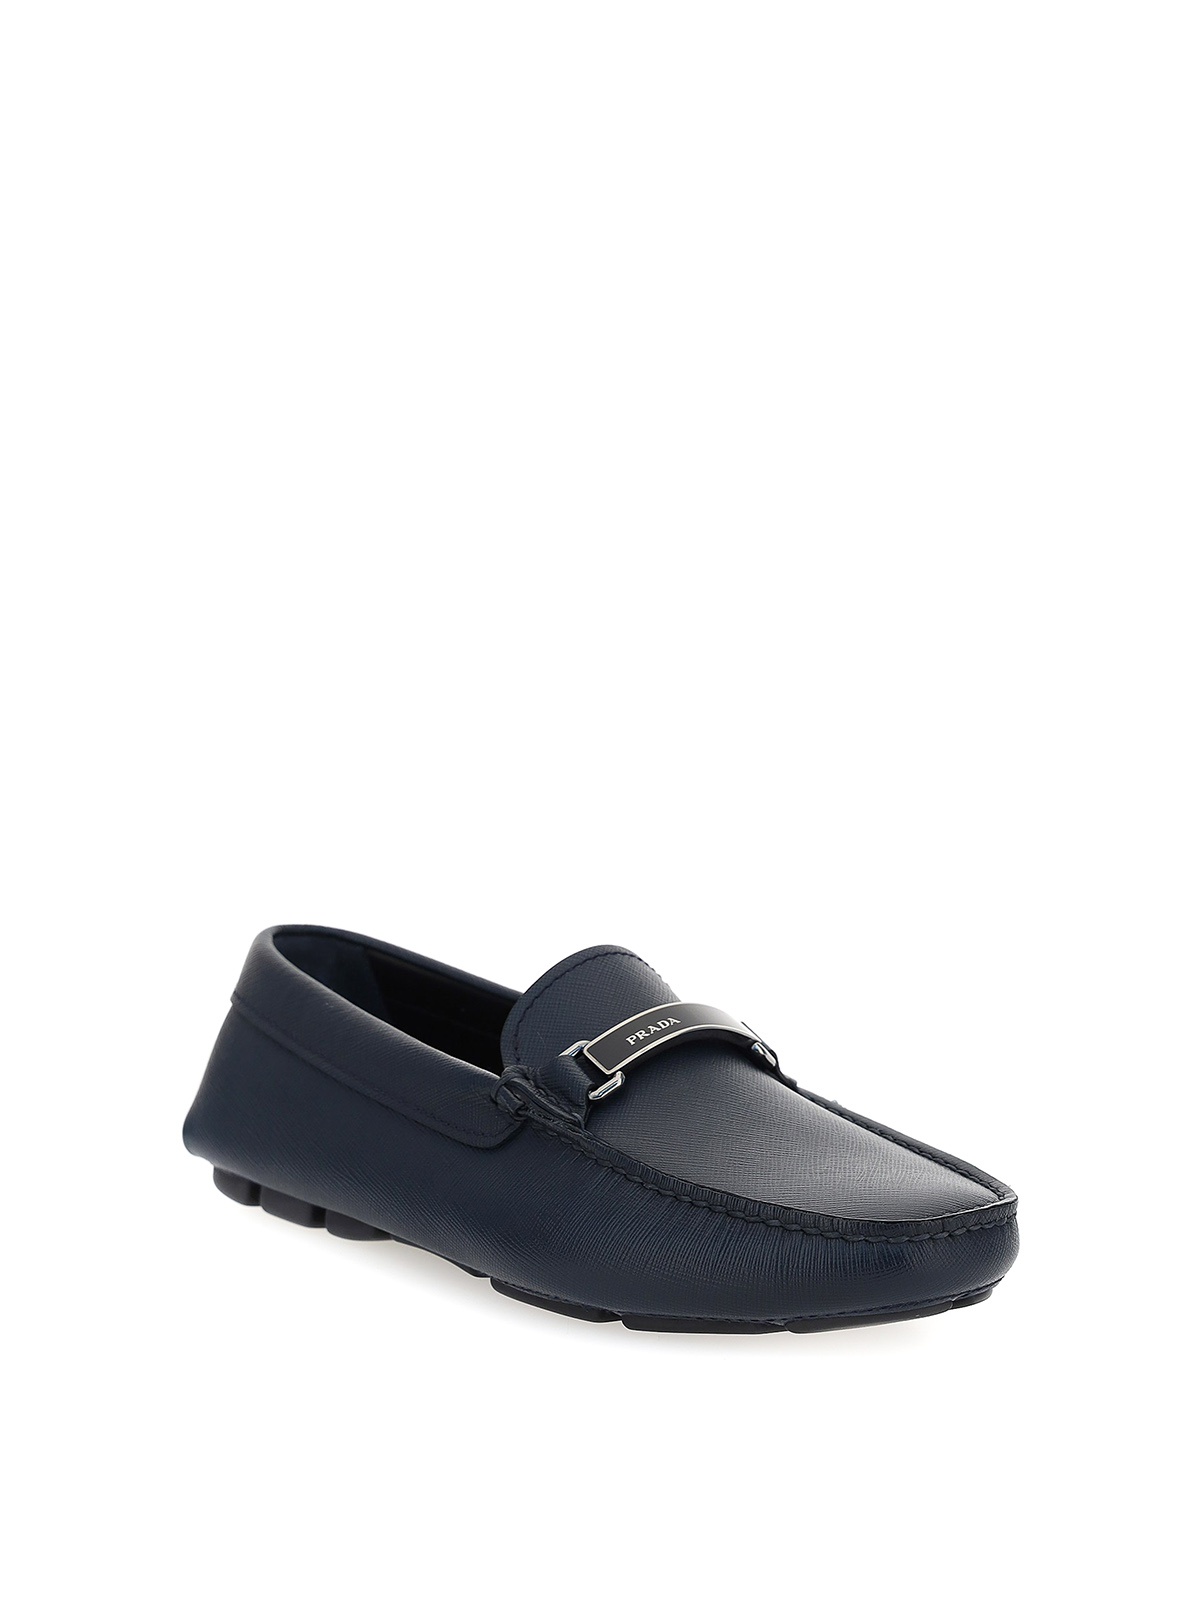 leather loafers online